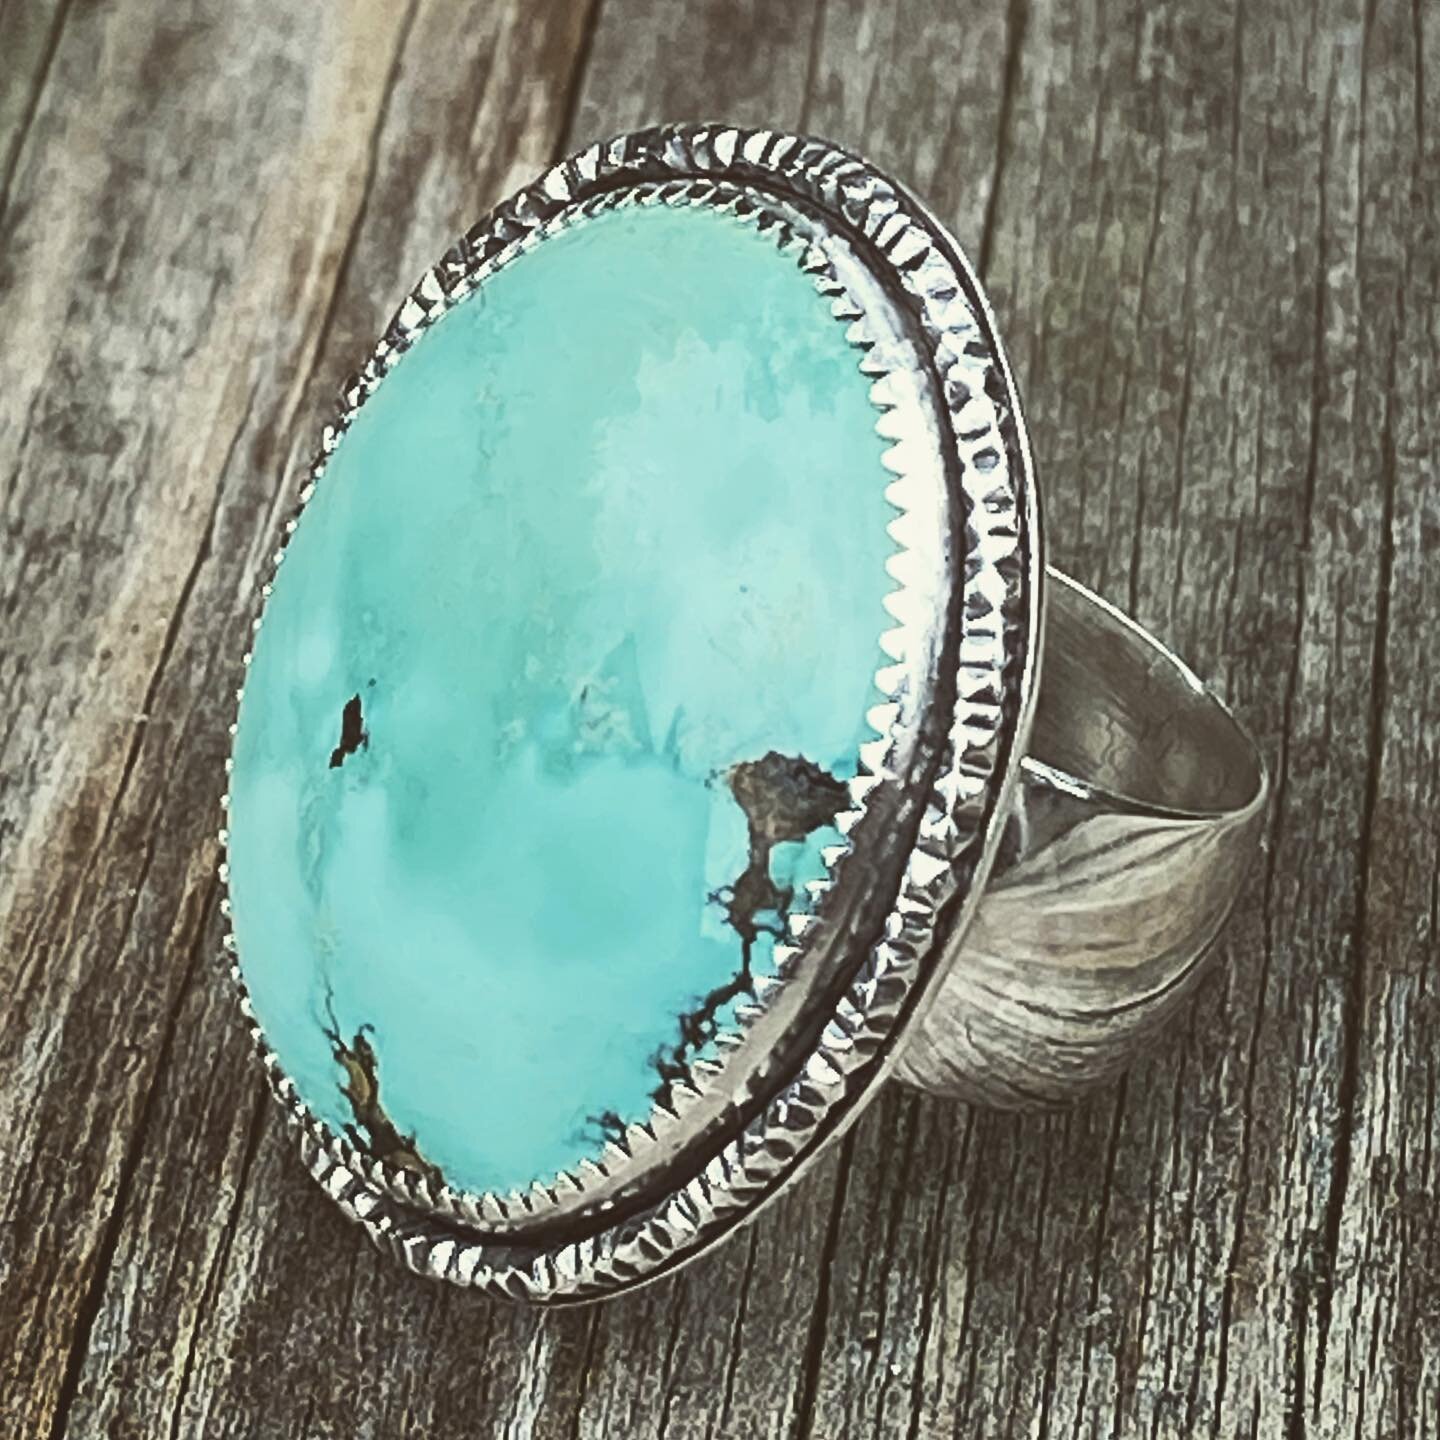 Yesterday marked the halfway point for the @sowaboston Winter Festival and what an amazing experience it&rsquo;s been so far! It also marked the departure of one of my favorite turquoise rings that I&rsquo;ve made. Alas I made it too big for me so I 